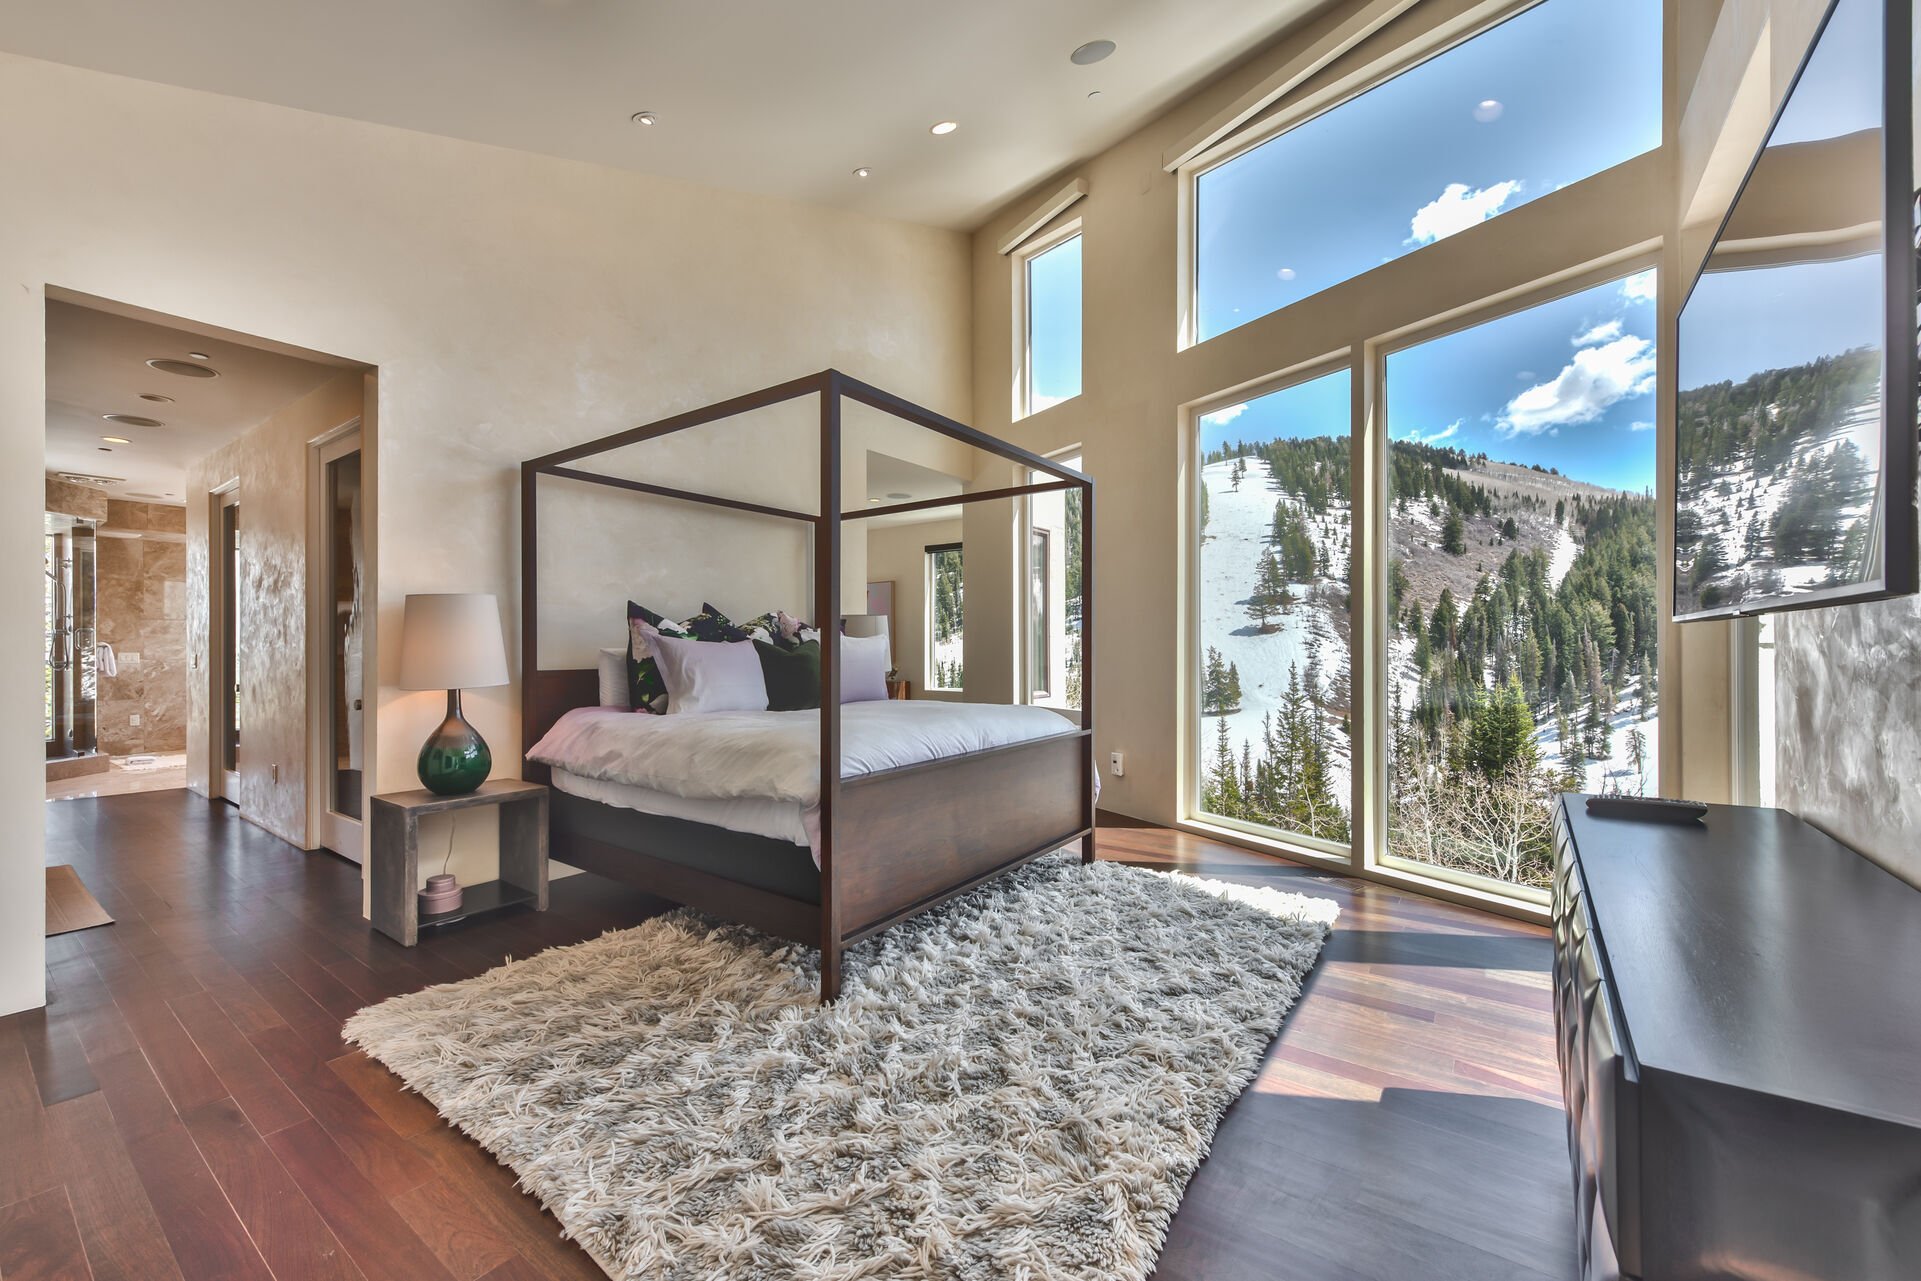 Grand Master Bedroom with a King Bed, Hardwood Floors and Exquisite Views Floor to Ceiling Views